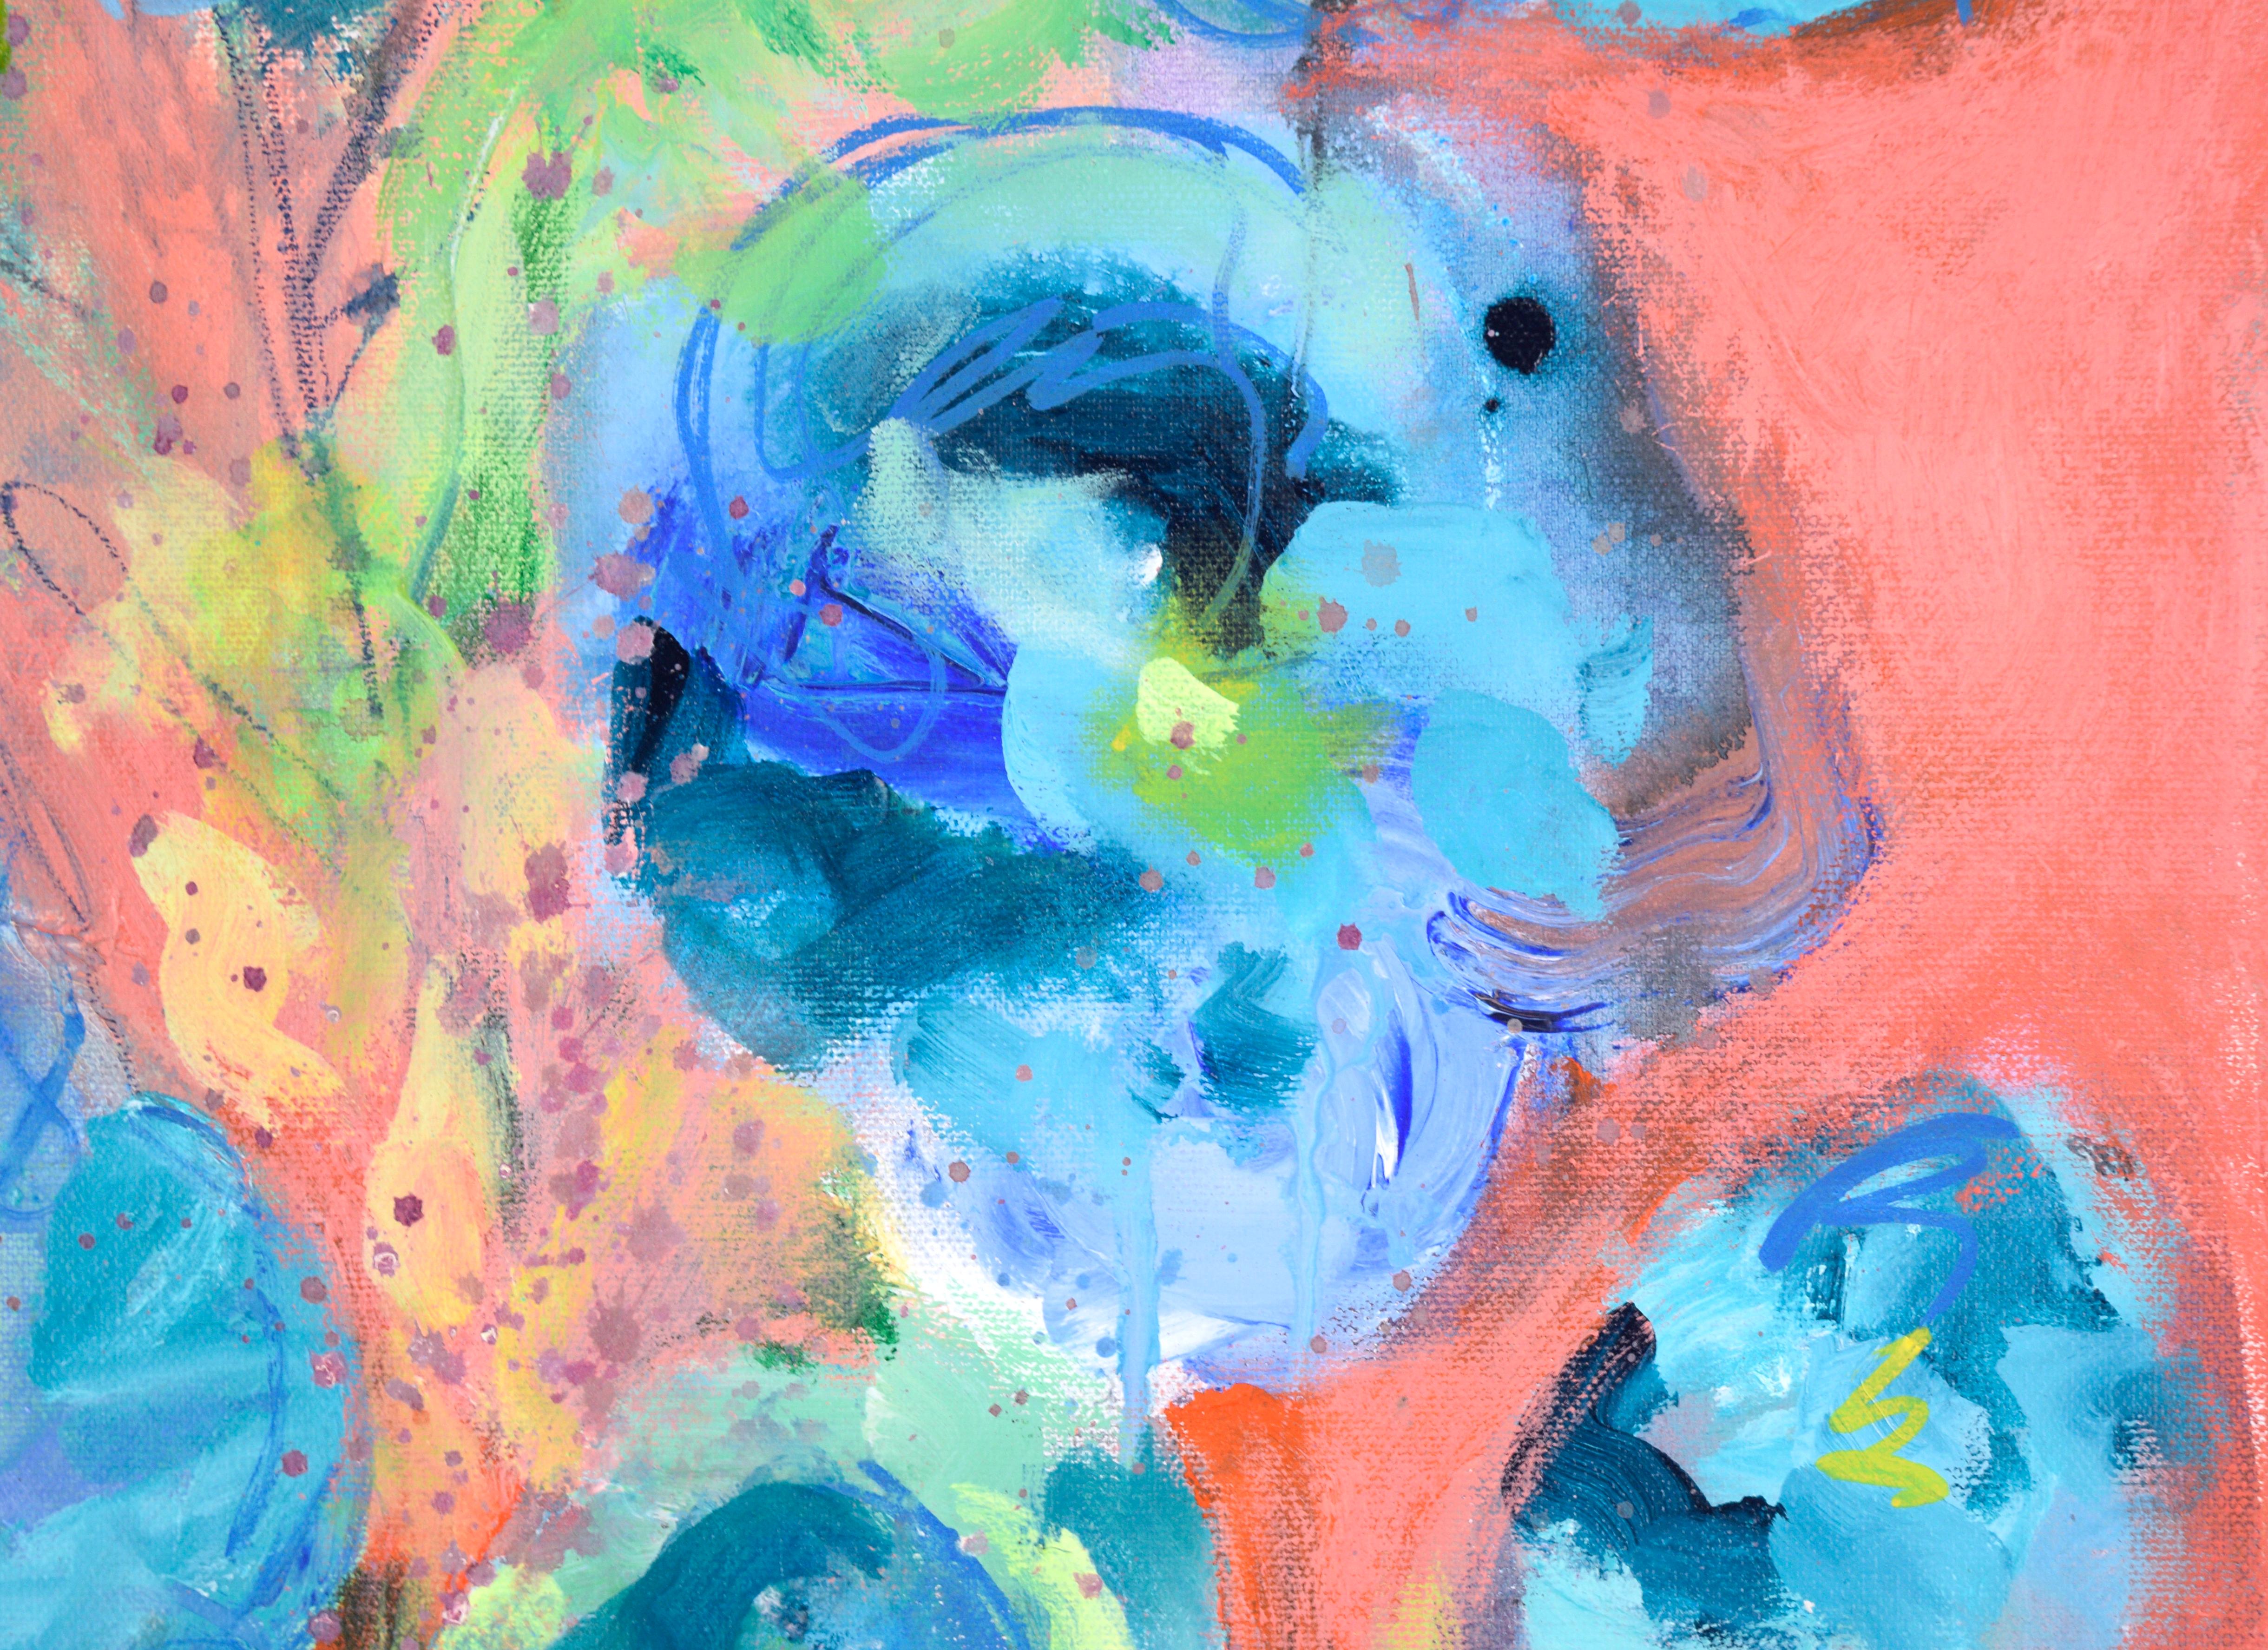 Blue and Pink Floral Still Life - Abstract Impressionist Painting by Ilana Ingber